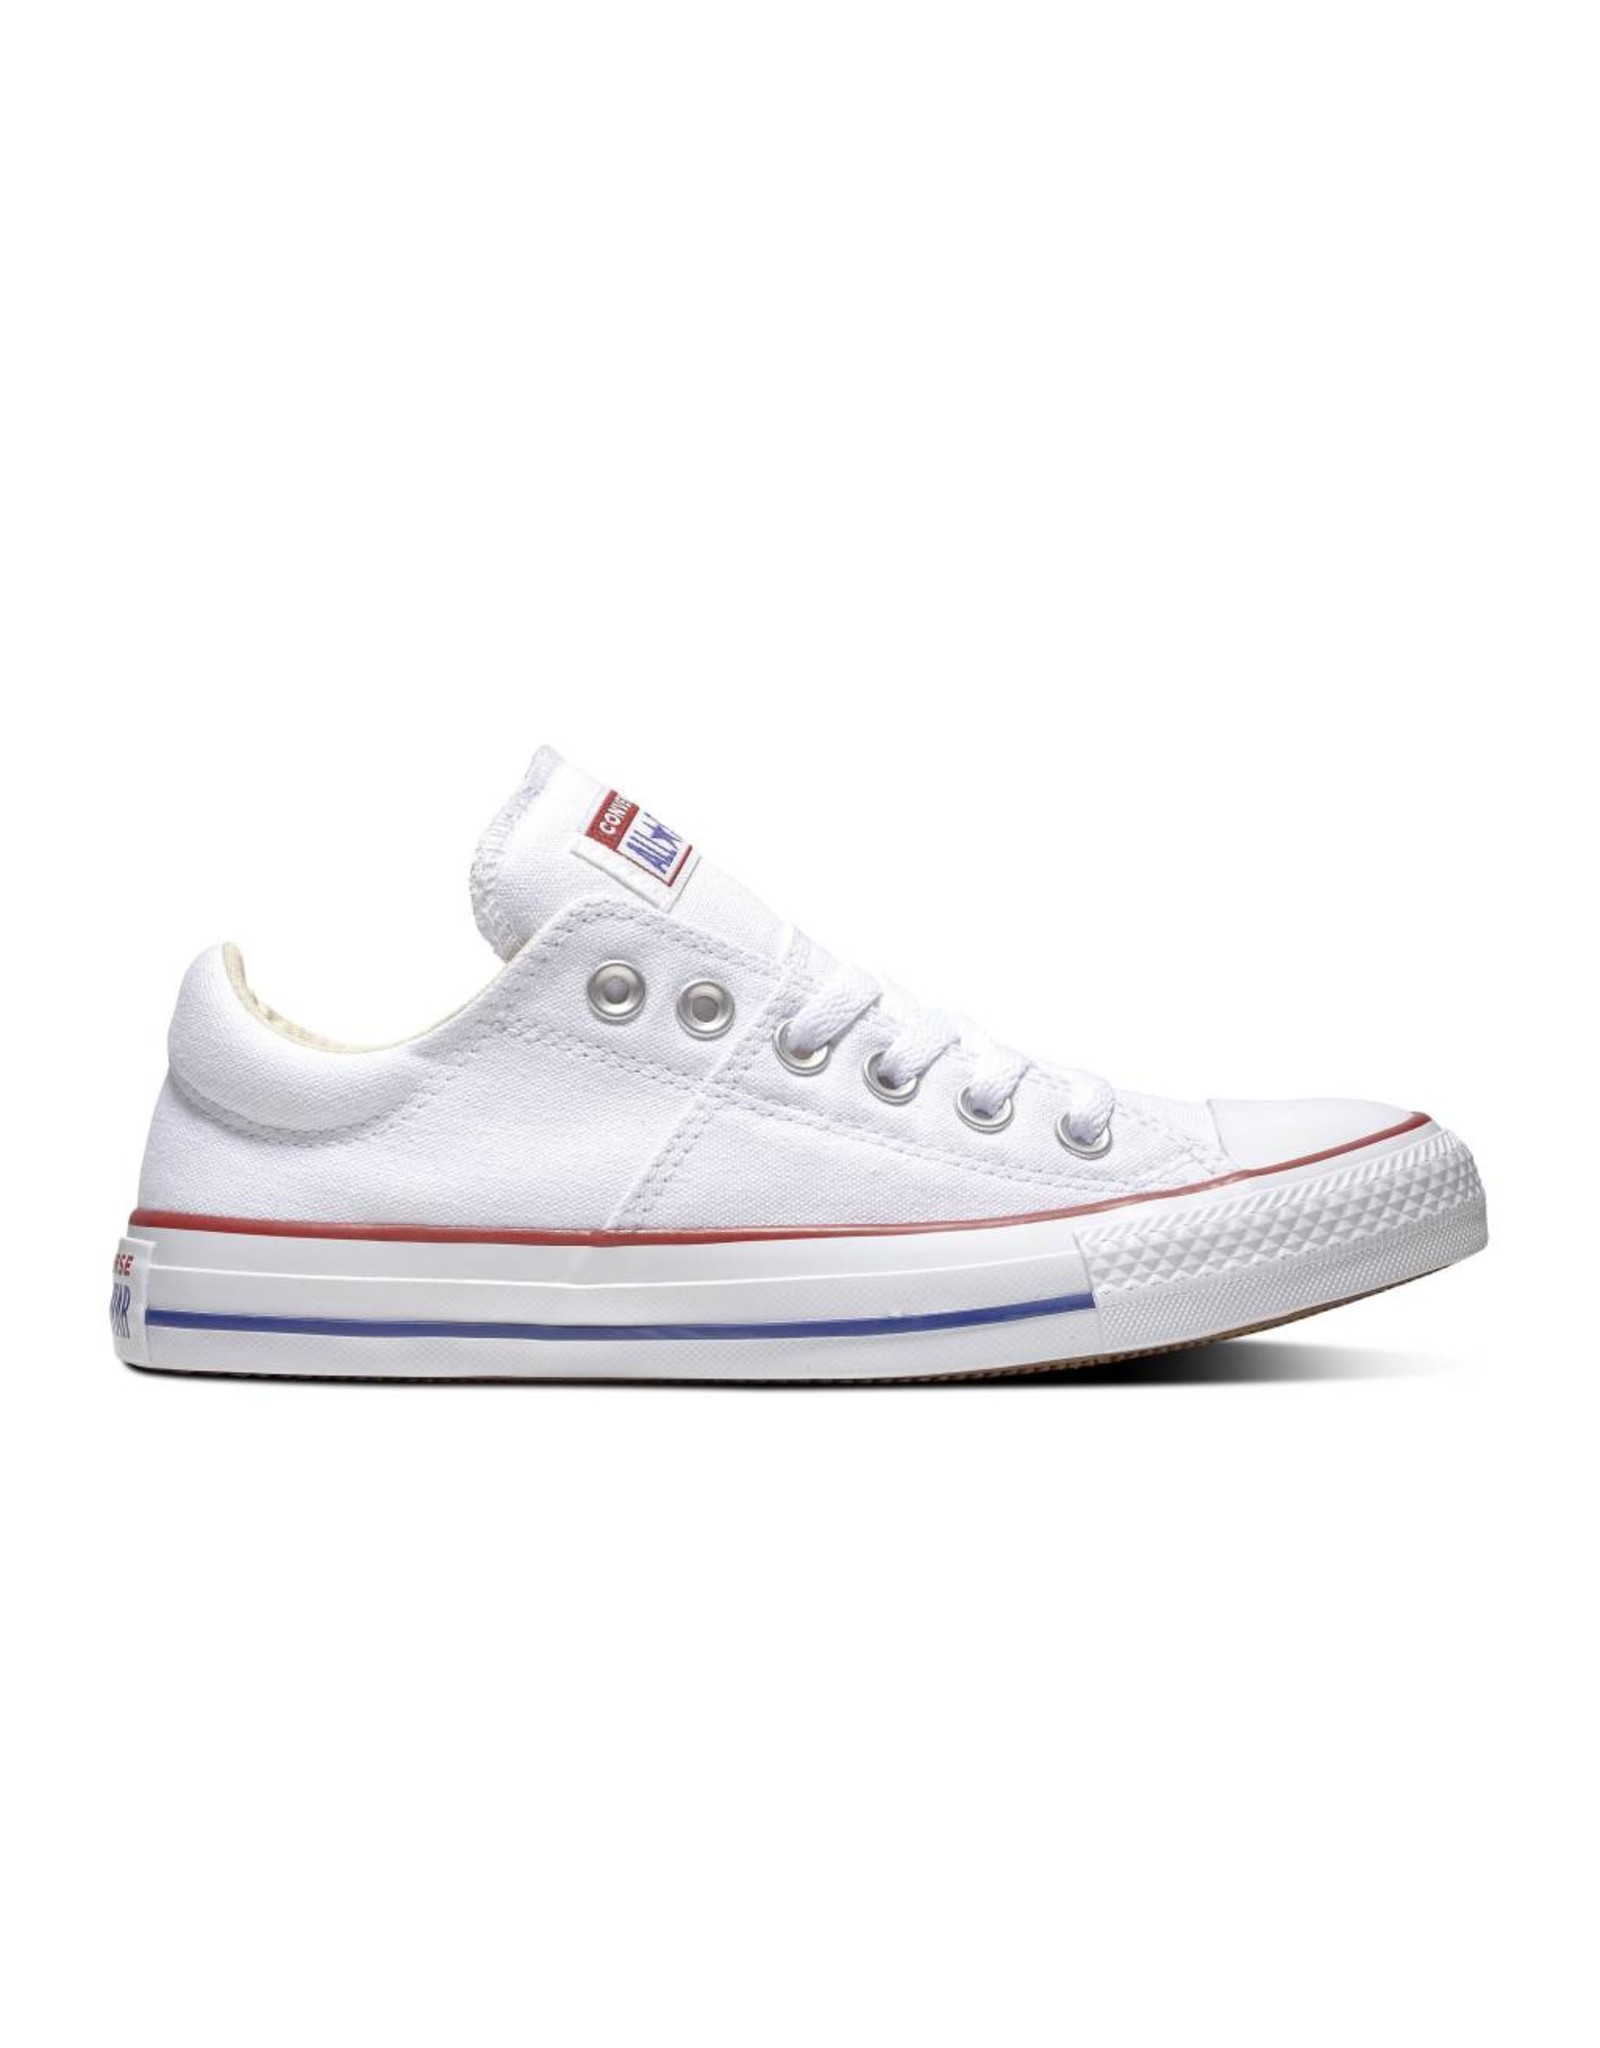 magasin converse all star montreal